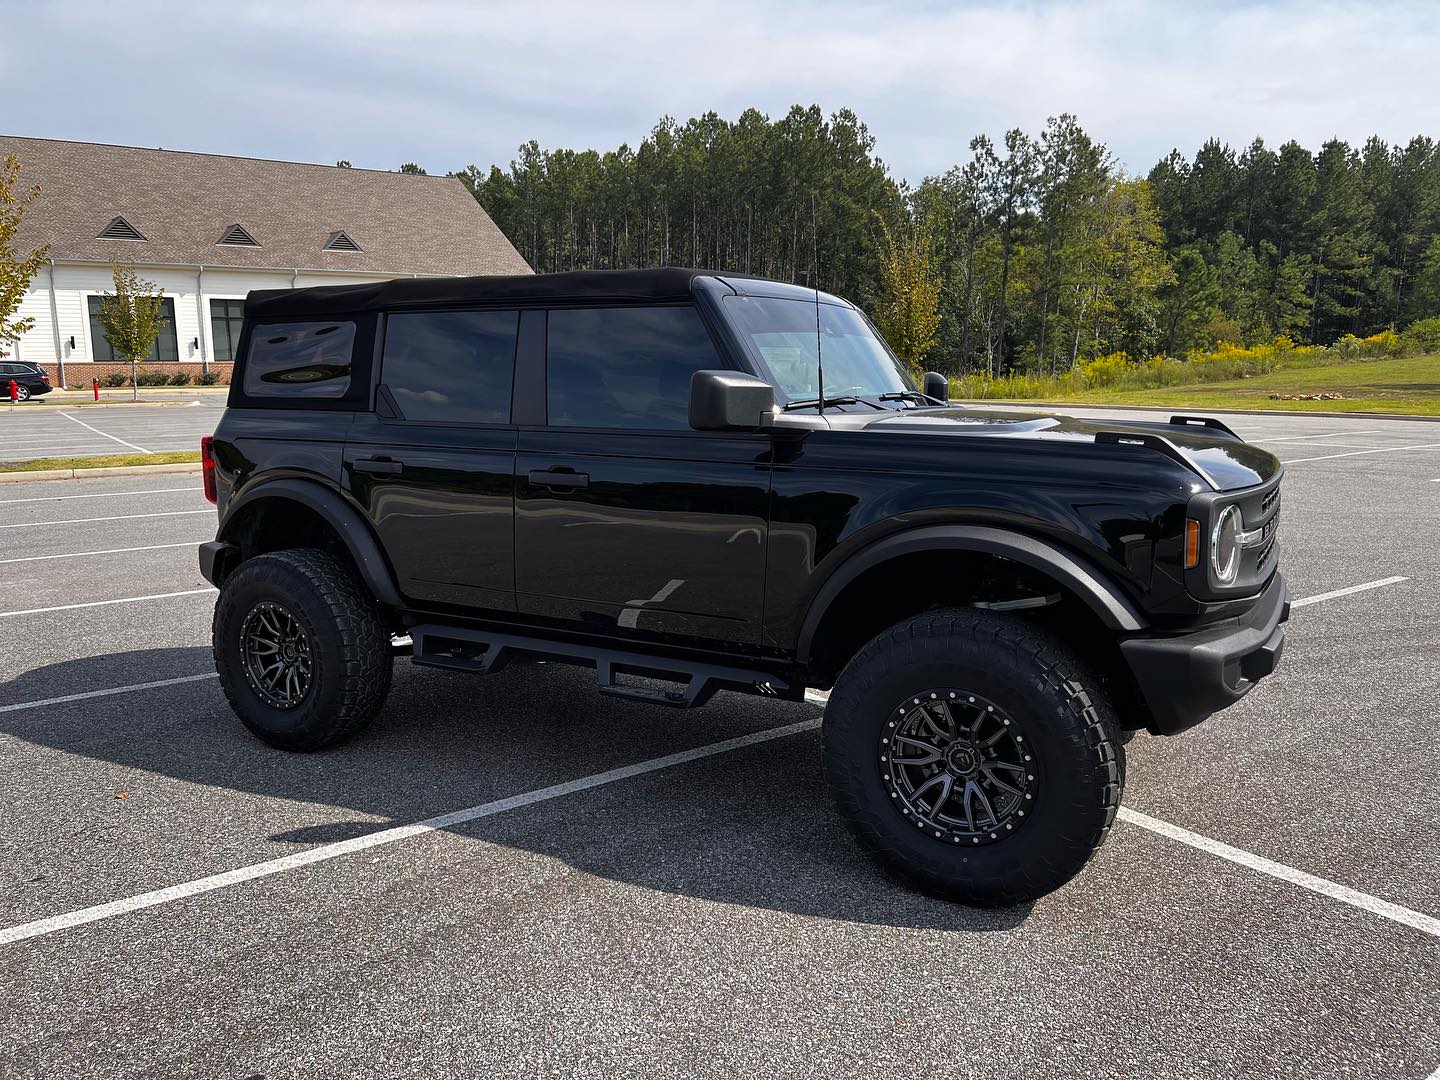 Elite Offroad And Performance 14555 US-280, Chelsea Alabama 35043